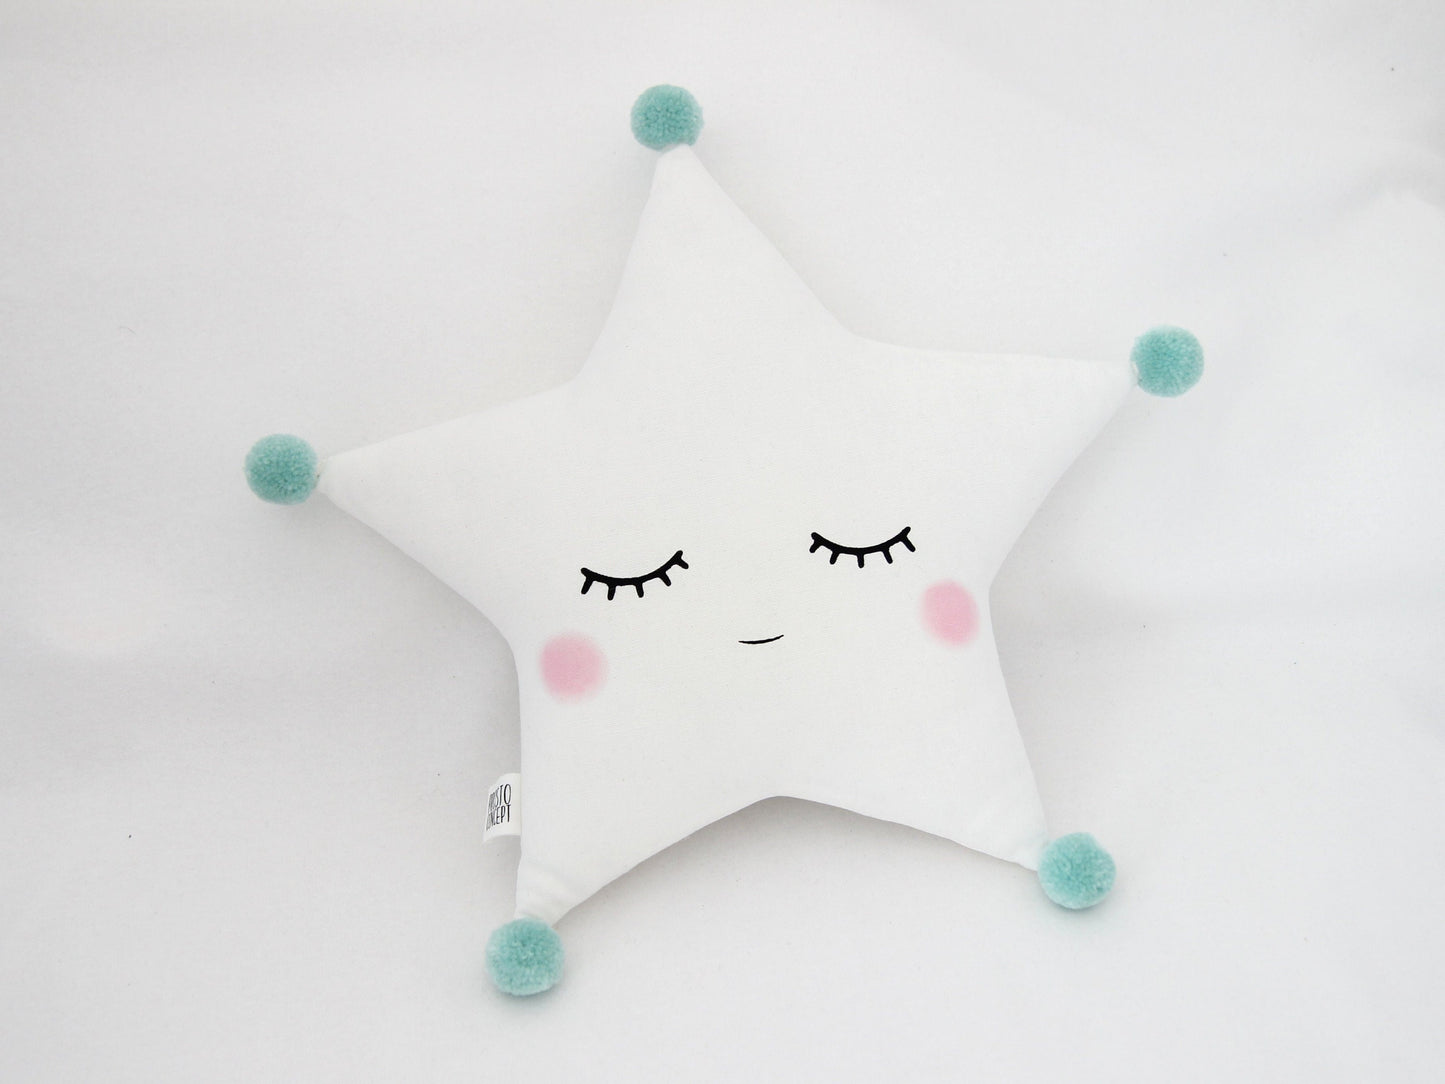 White Star Pillow with Pompoms (7 colors)